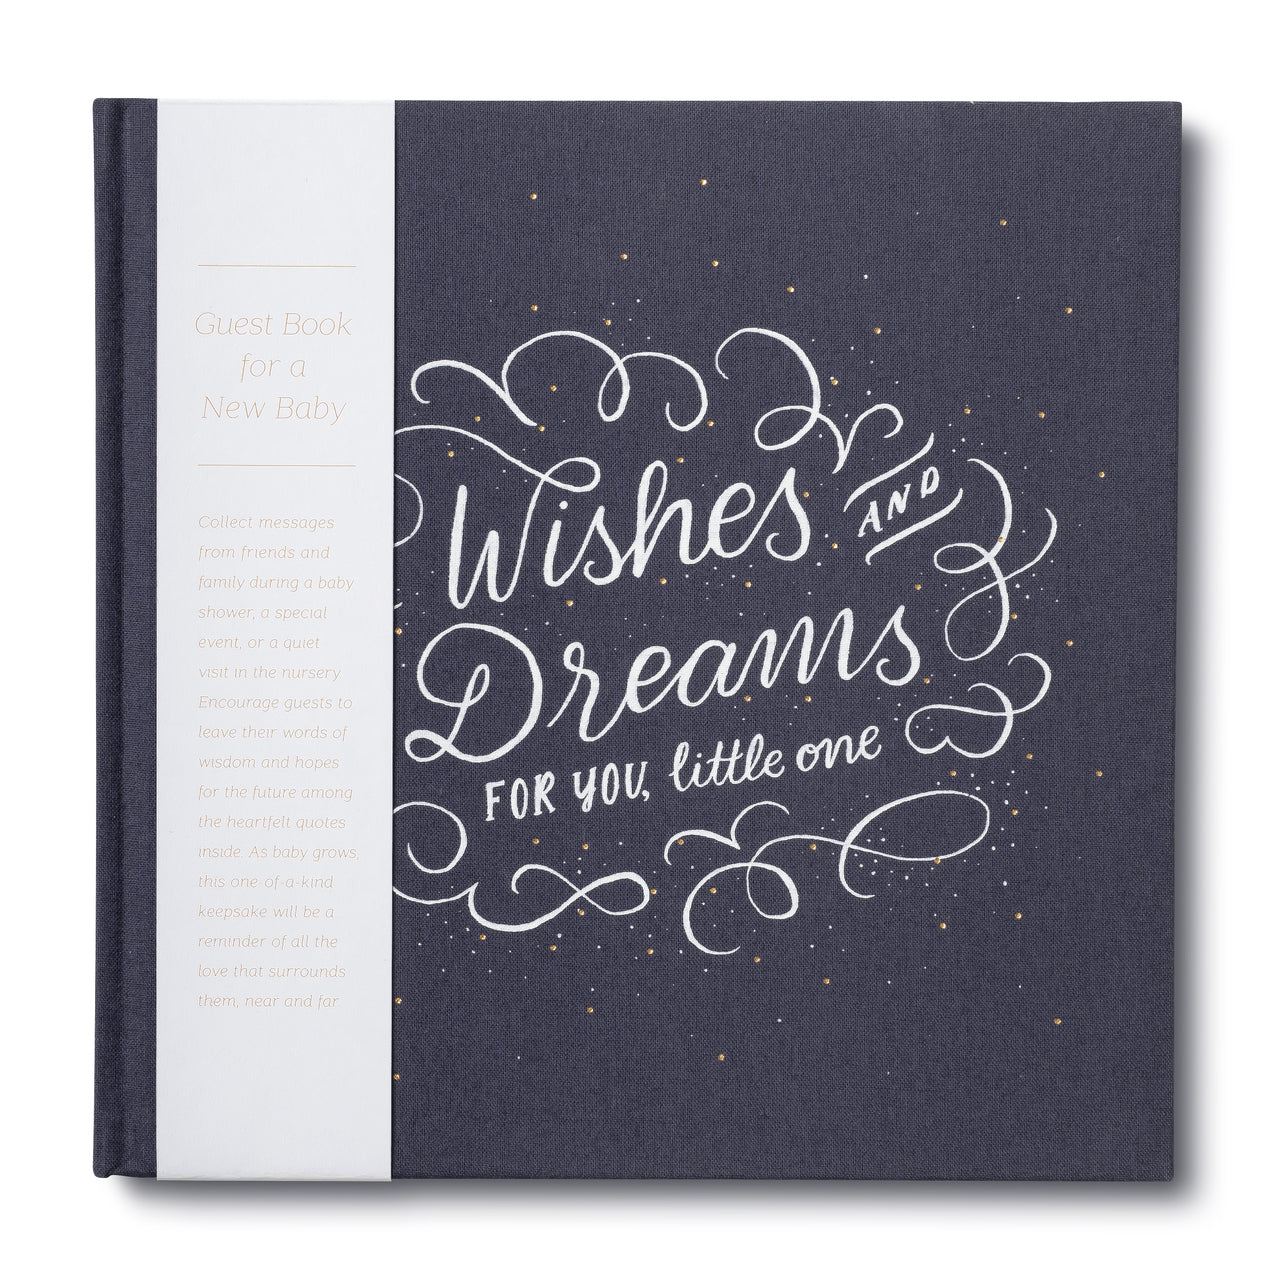 Wishes and Dreams For You, Little One - Madison's Niche 